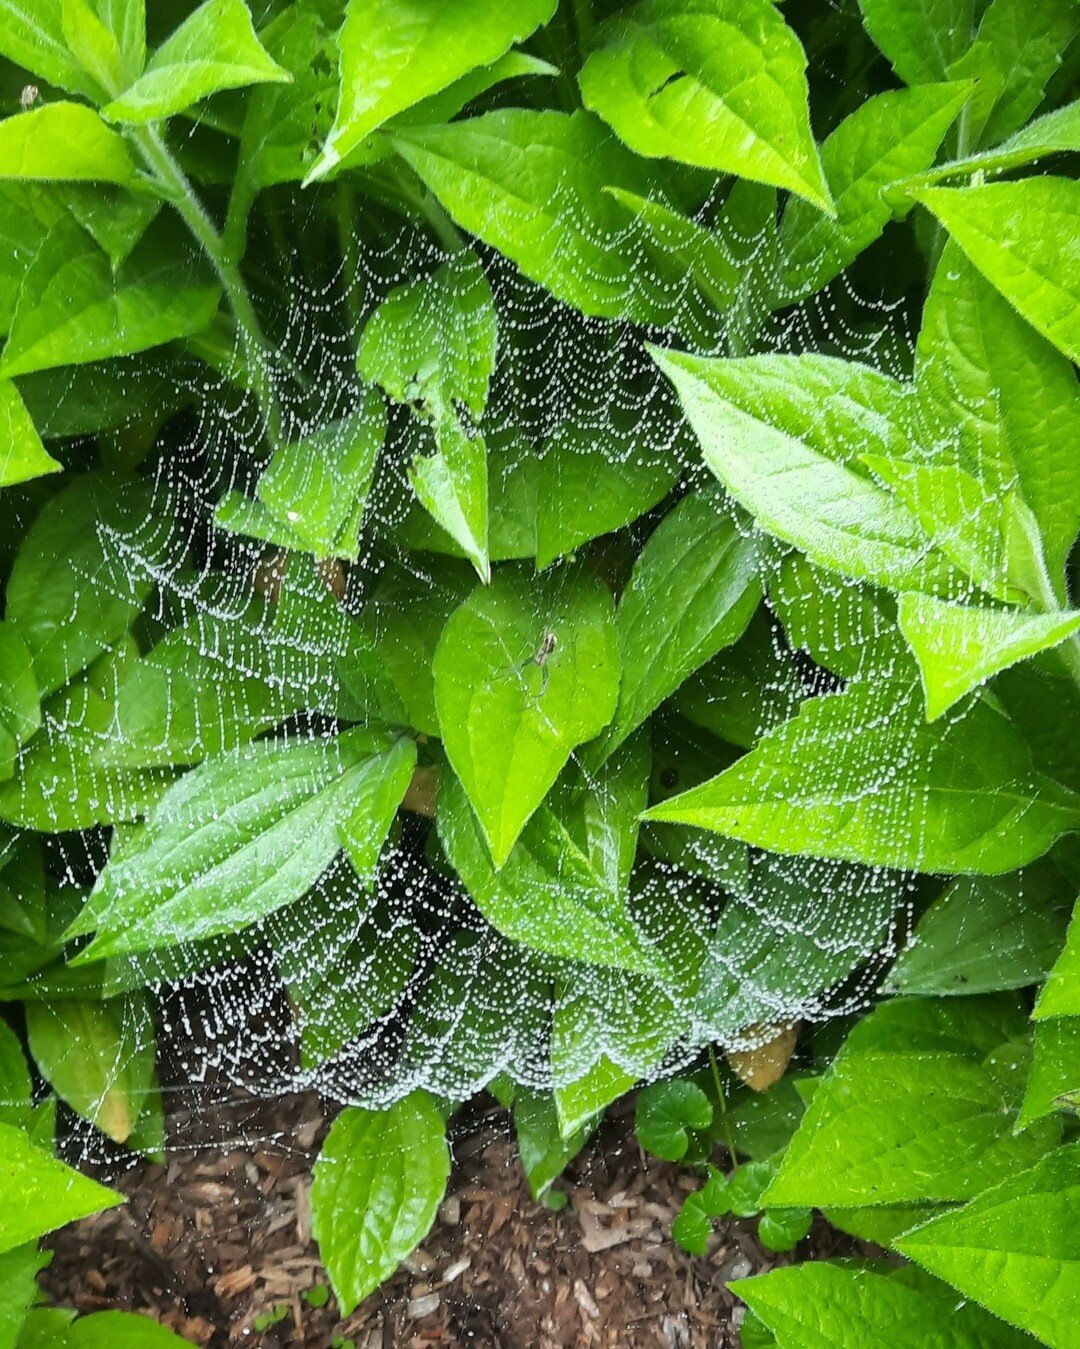 Intricate web highlighted by the rain